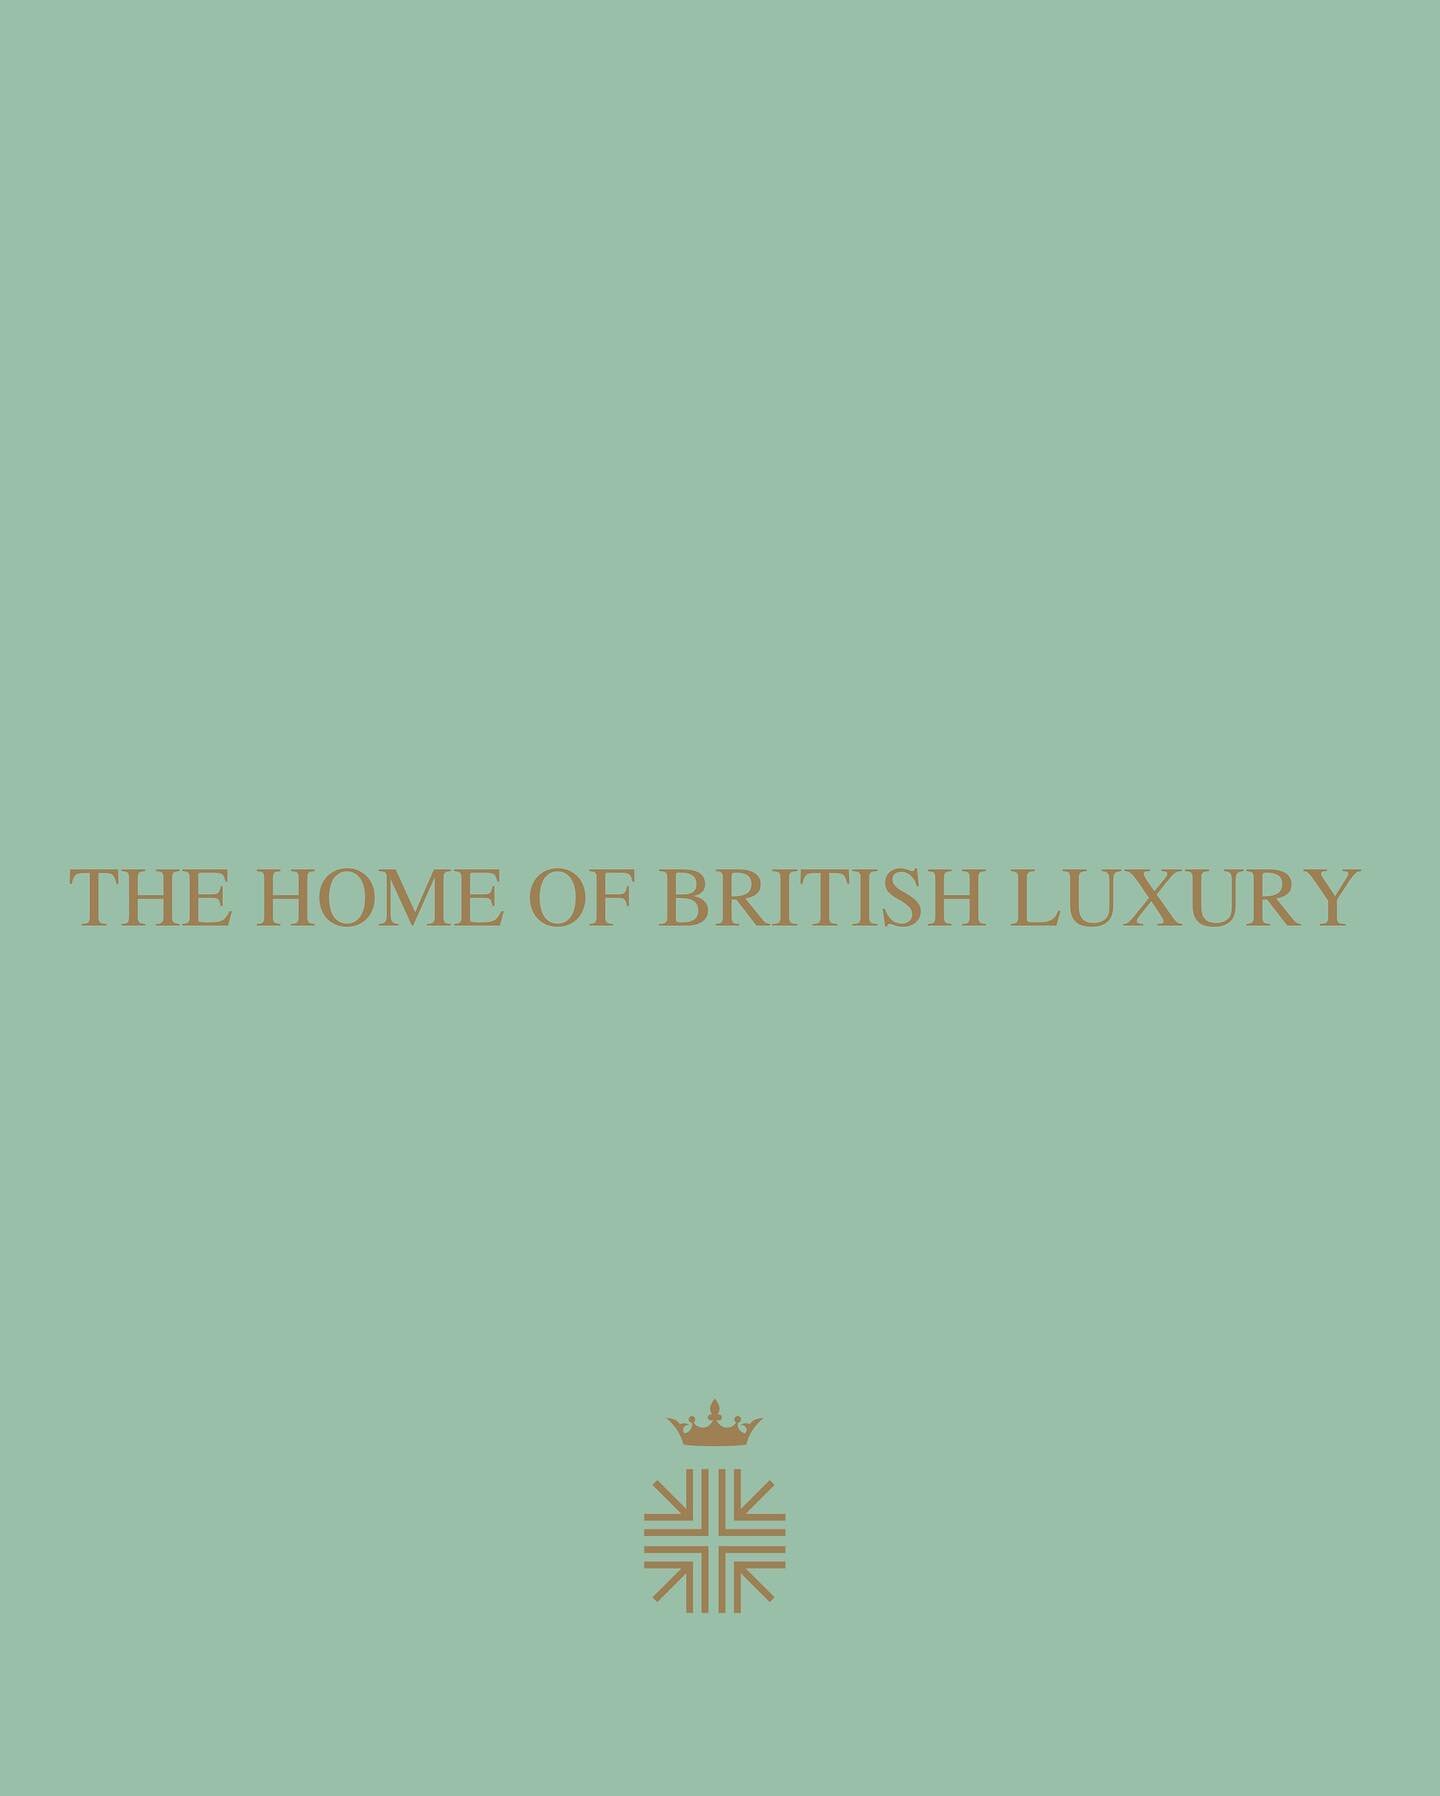 We are extremely proud to have been one of many British Luxury Brands to be selected for House of Walpole - The Home of British Luxury Craftsmanship brings together Britain&rsquo;s best luxury brands within one space. It is a collaboration between @n